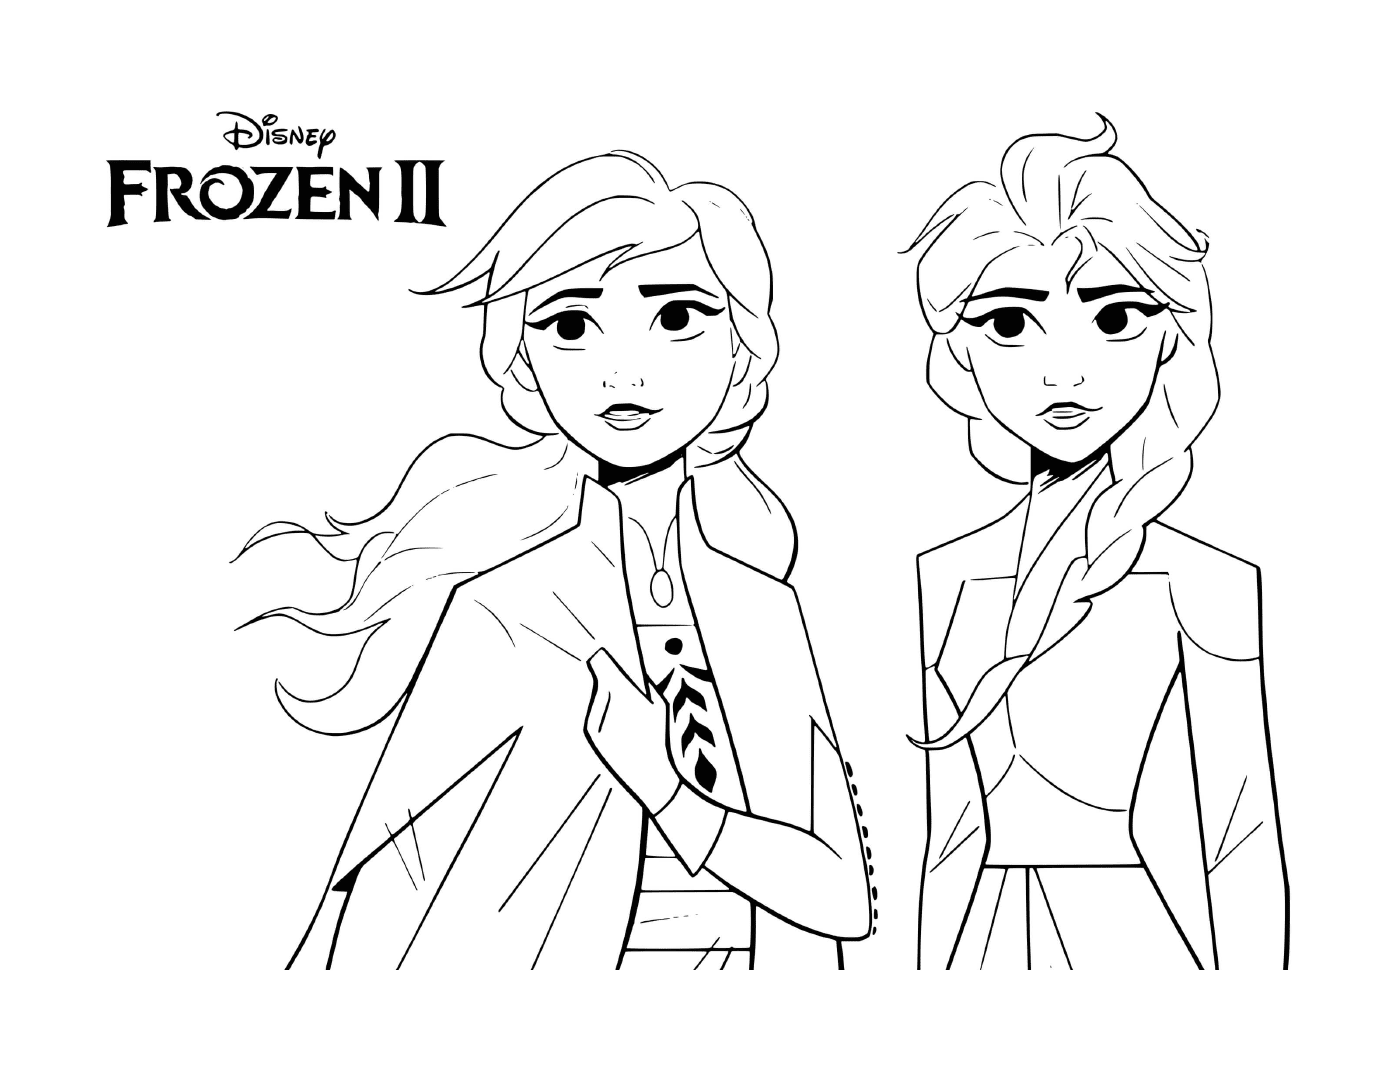  Elsa and Anna together 